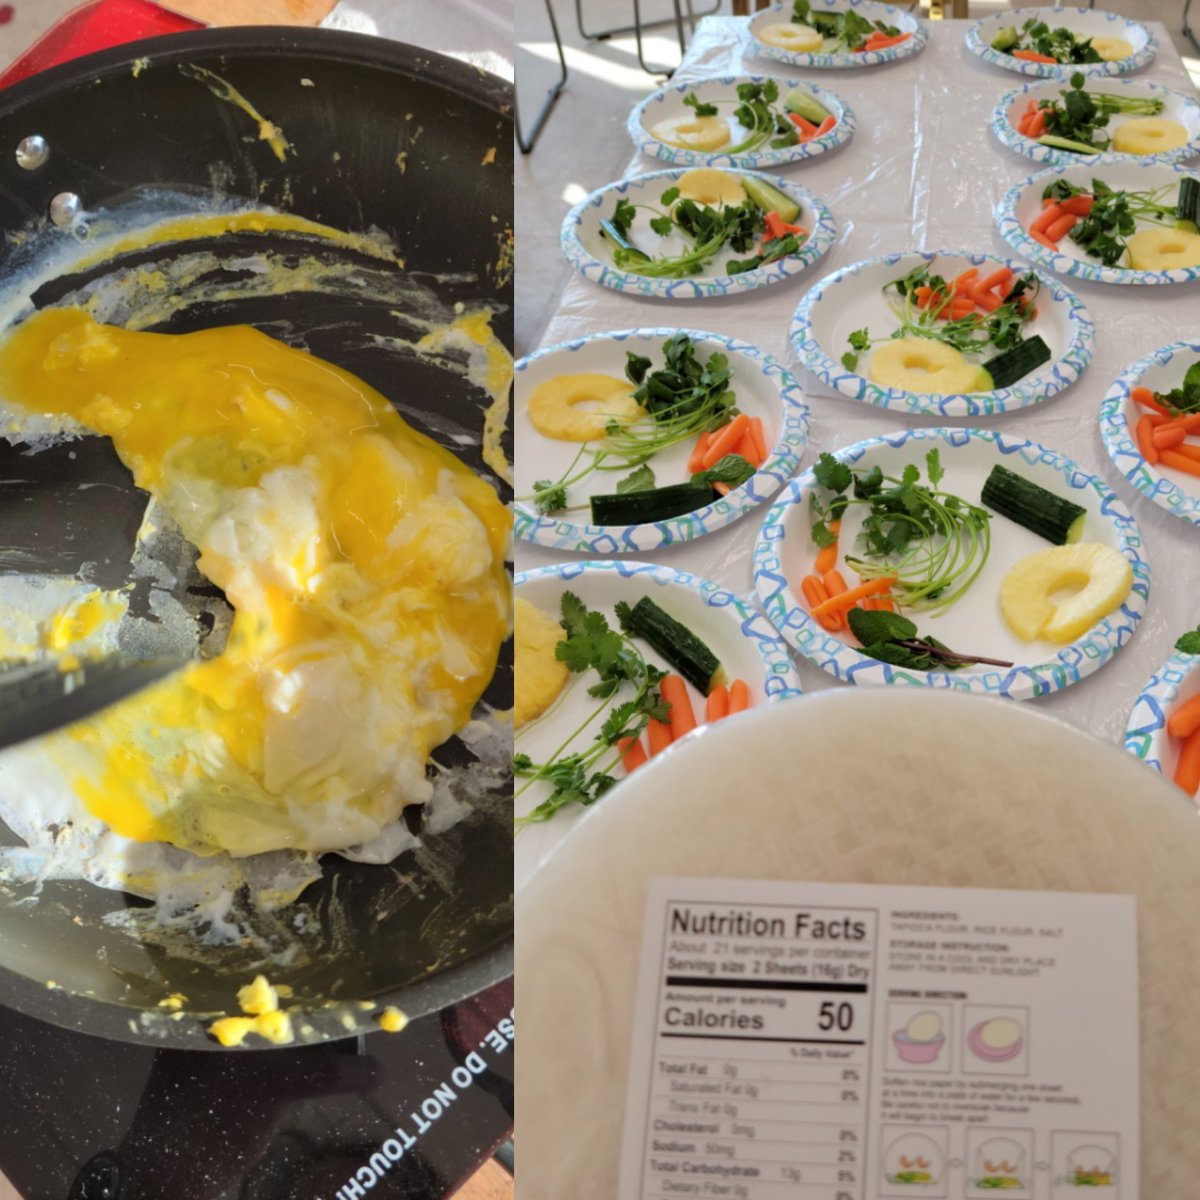 Spring rolls part 1 @BravoTopChef. @LakelandSchool youth got to cook eggs for the first time (for some) and nobody cracked shell into their egg and produce spring role! @USDAFoodSafety thanks for the activity books from #cfsec2023